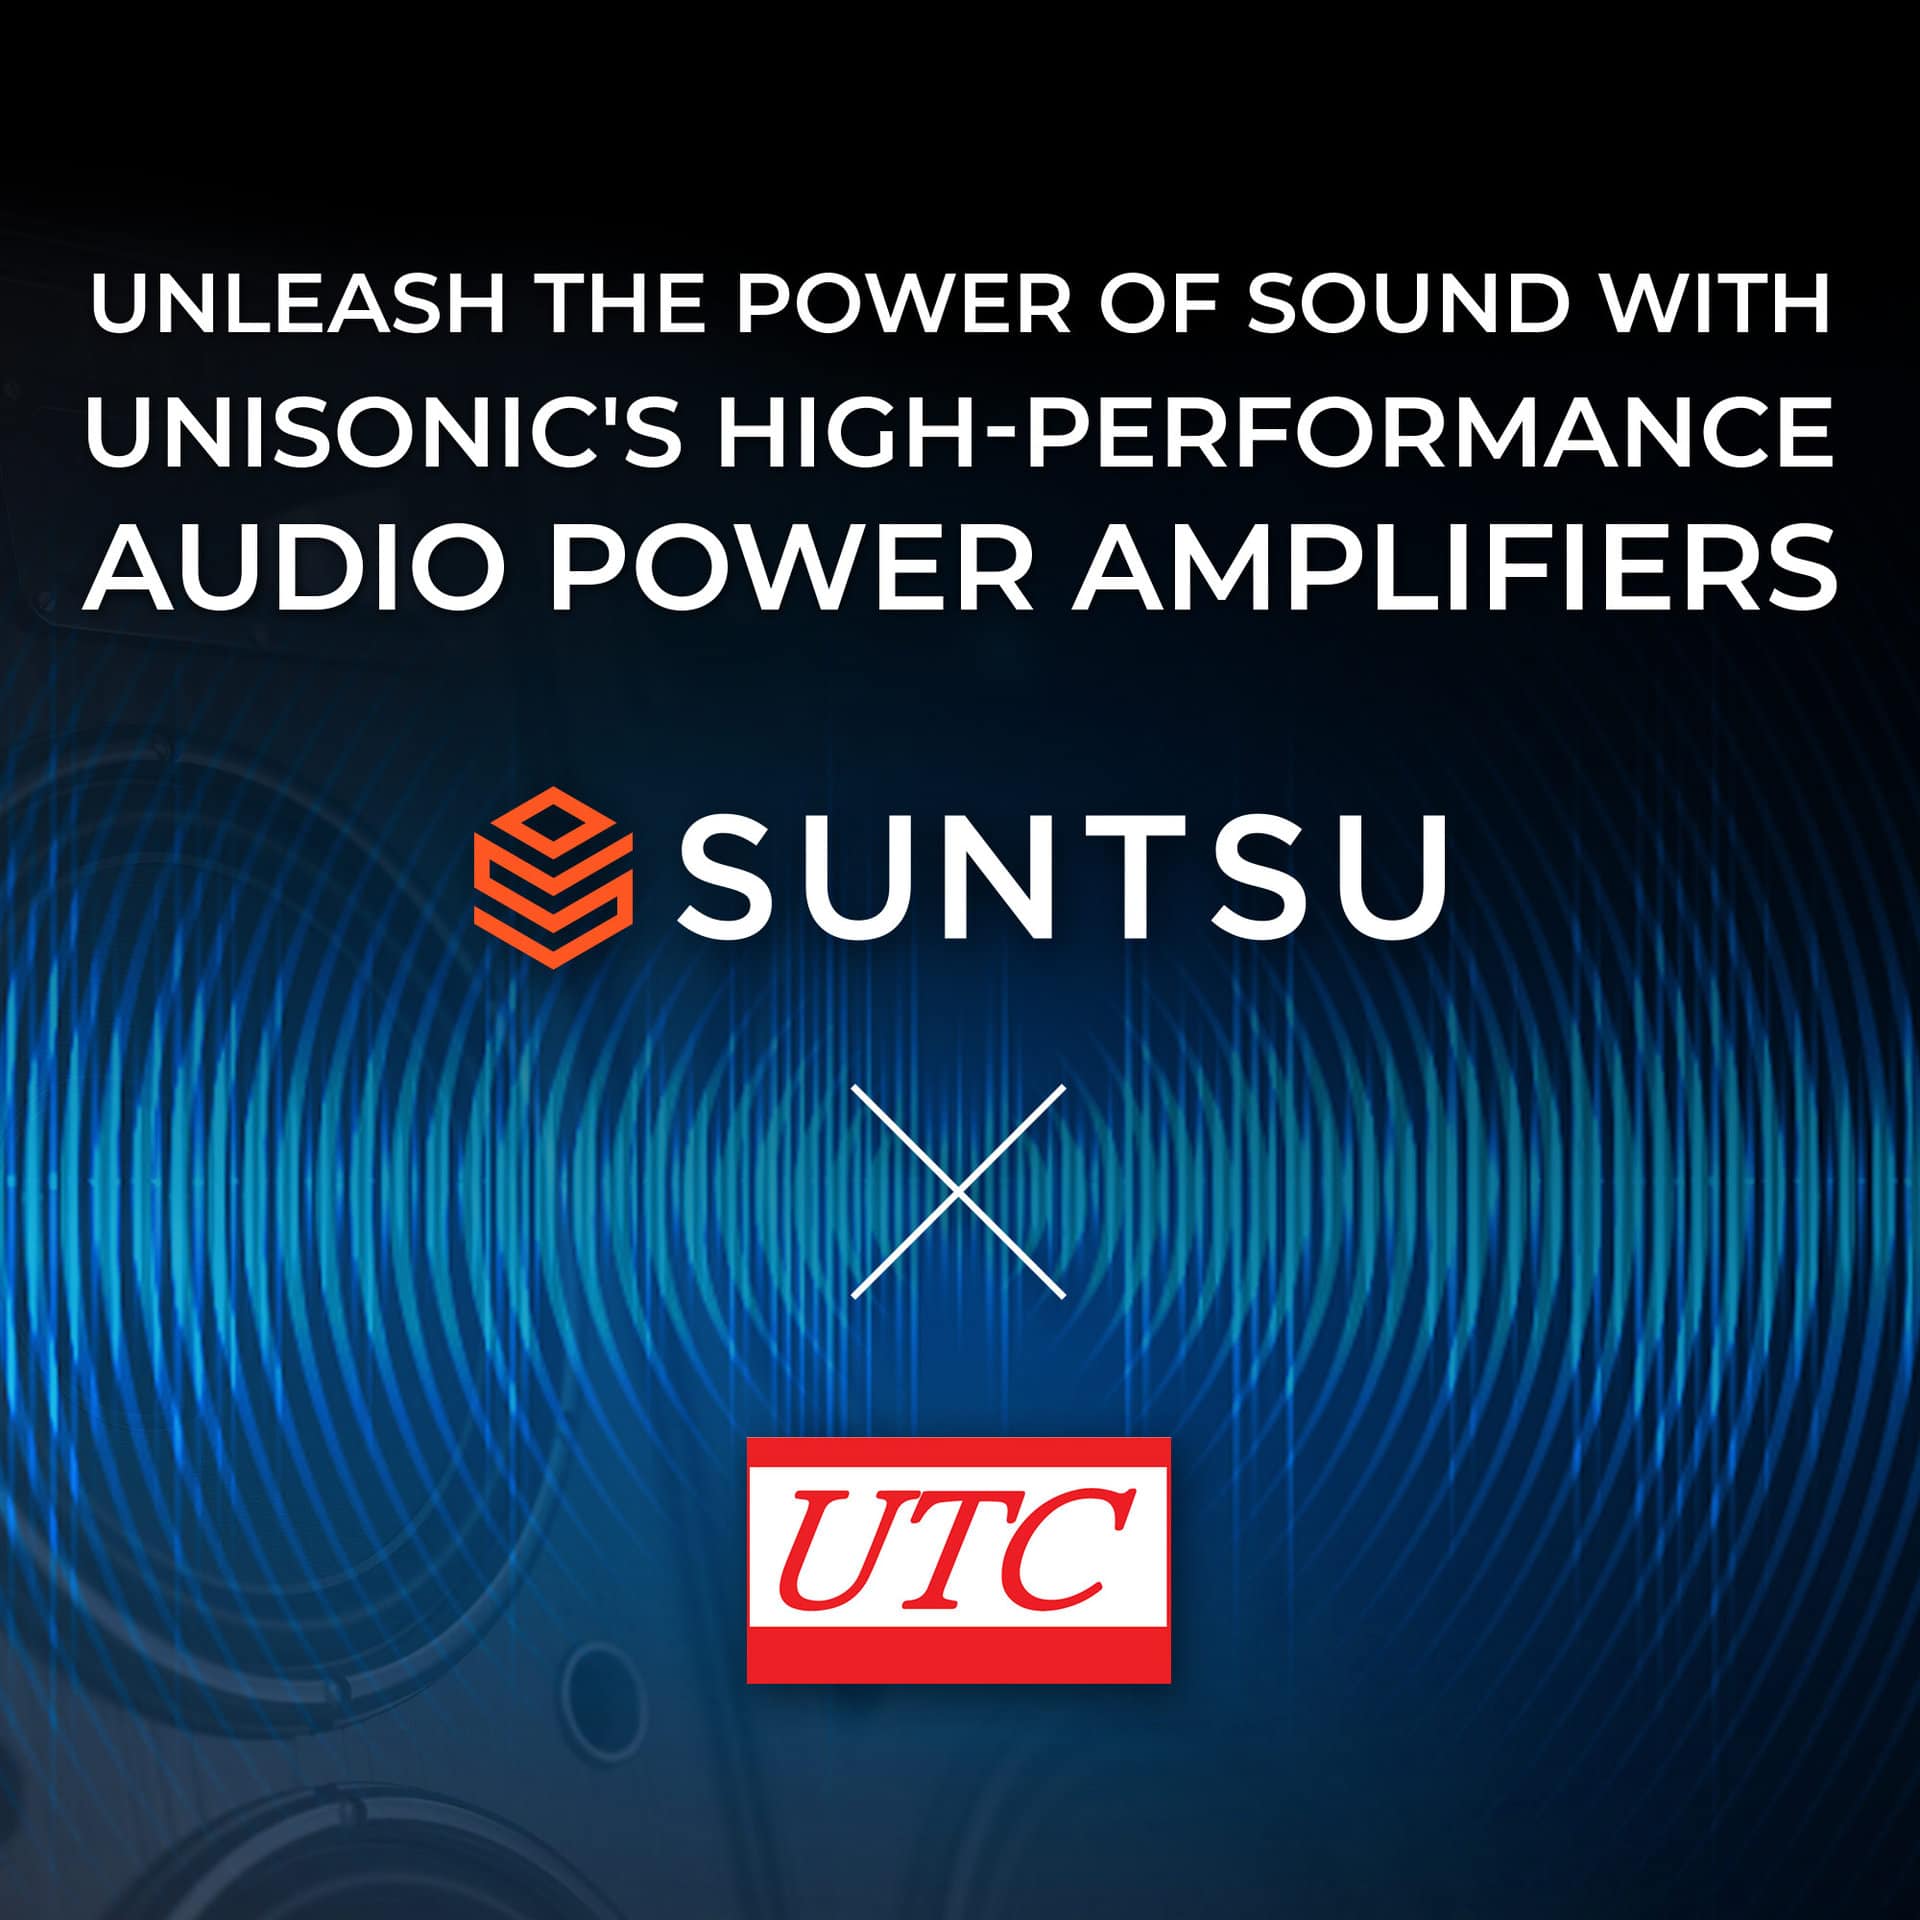 Unleash the Power of Sound with Unisonic’s High-Performance Audio Power Amplifiers